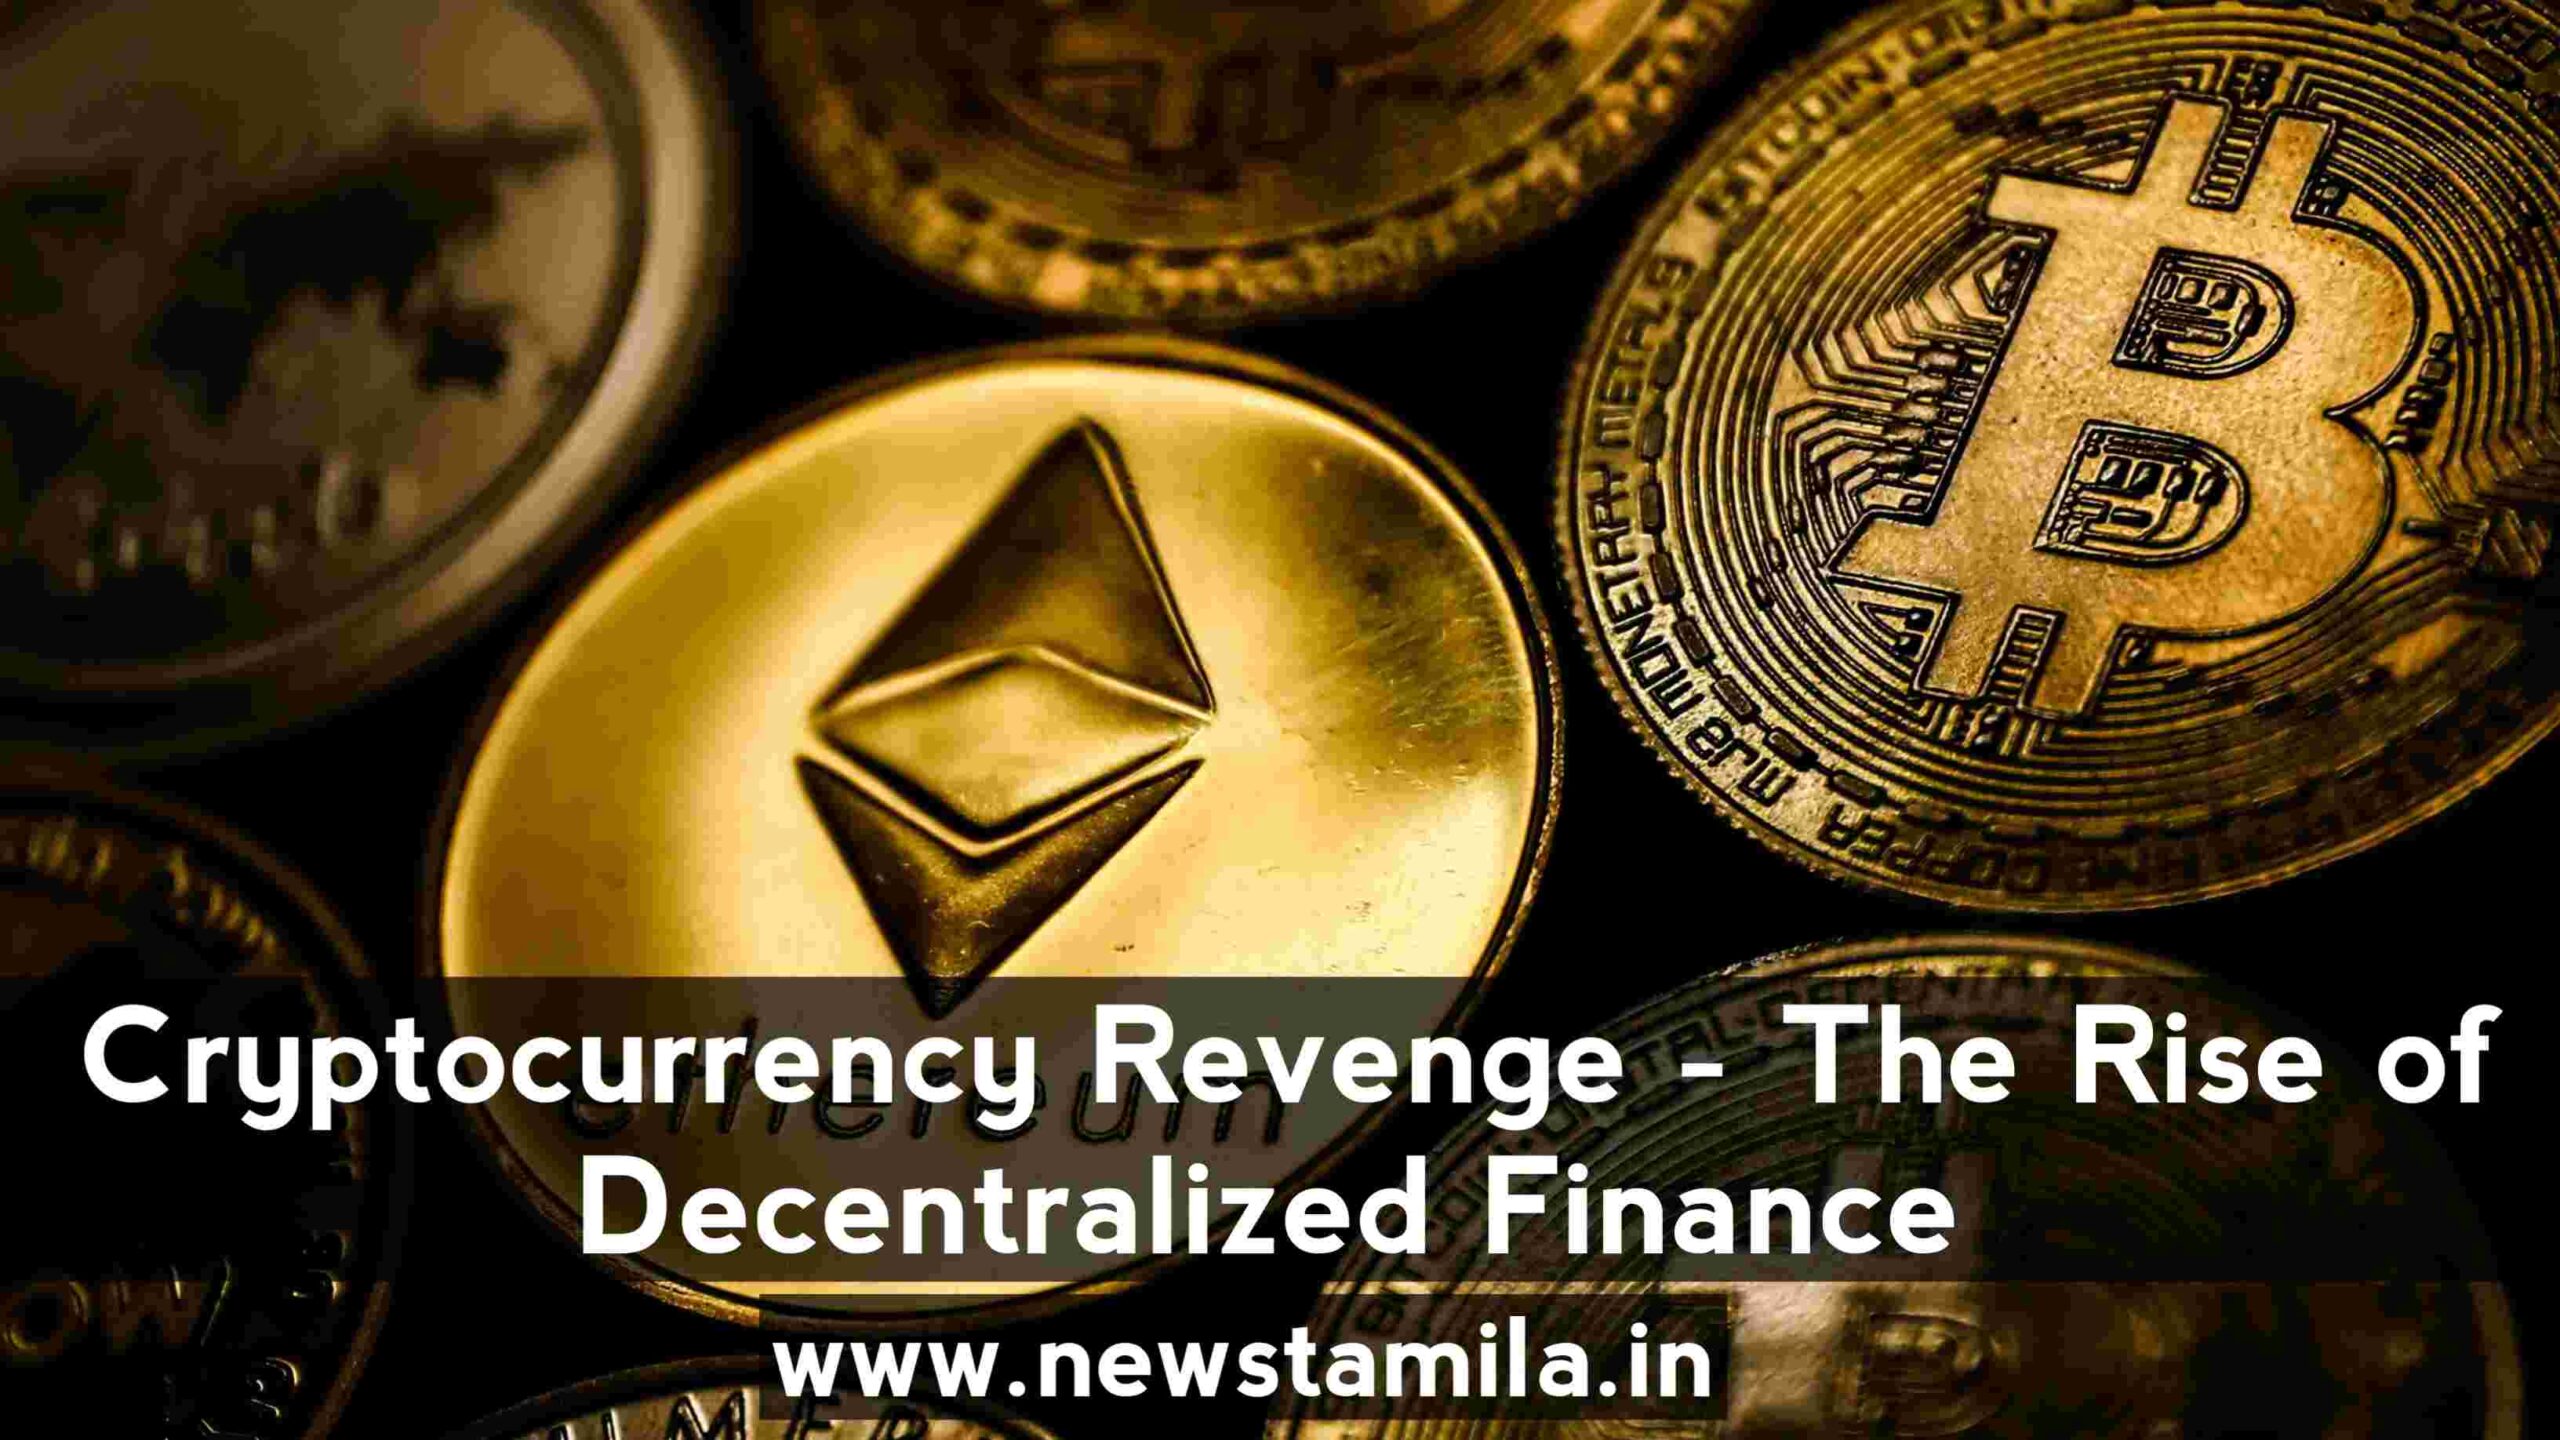 Cryptocurrency Revenge - The Rise of Decentralized Finance